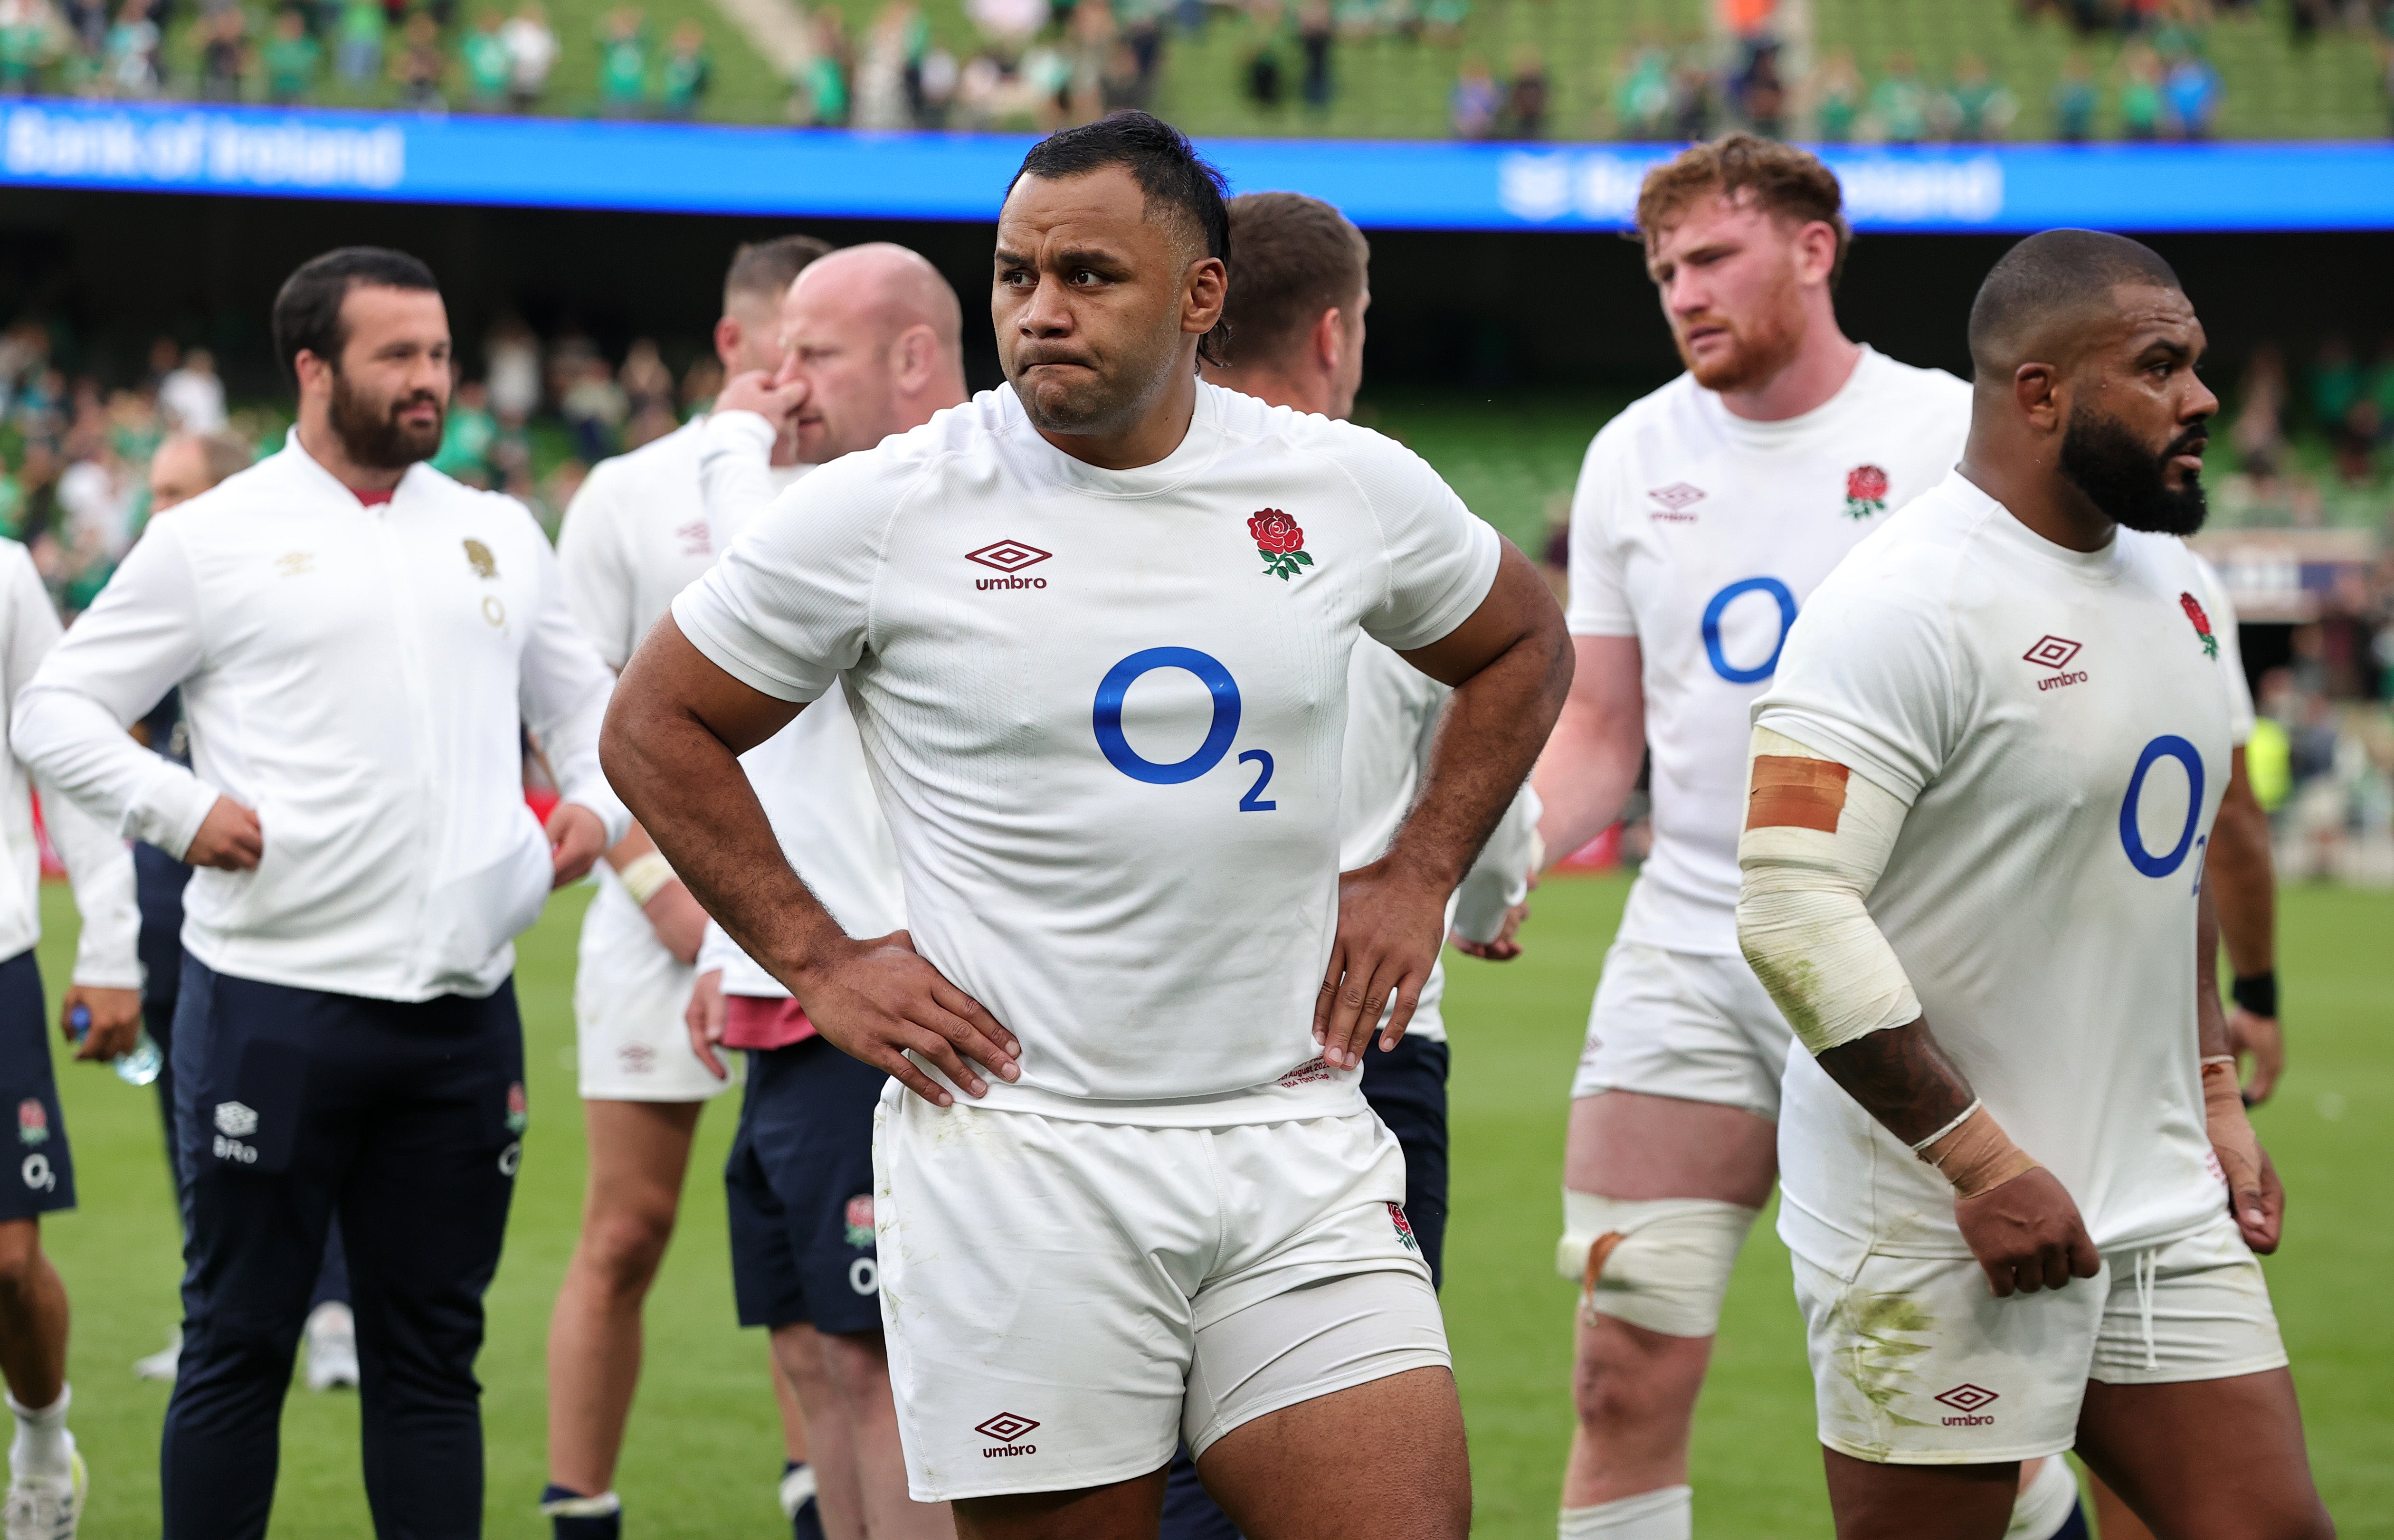 Billy Vunipola’s suspension is one of a litany of issues that England face